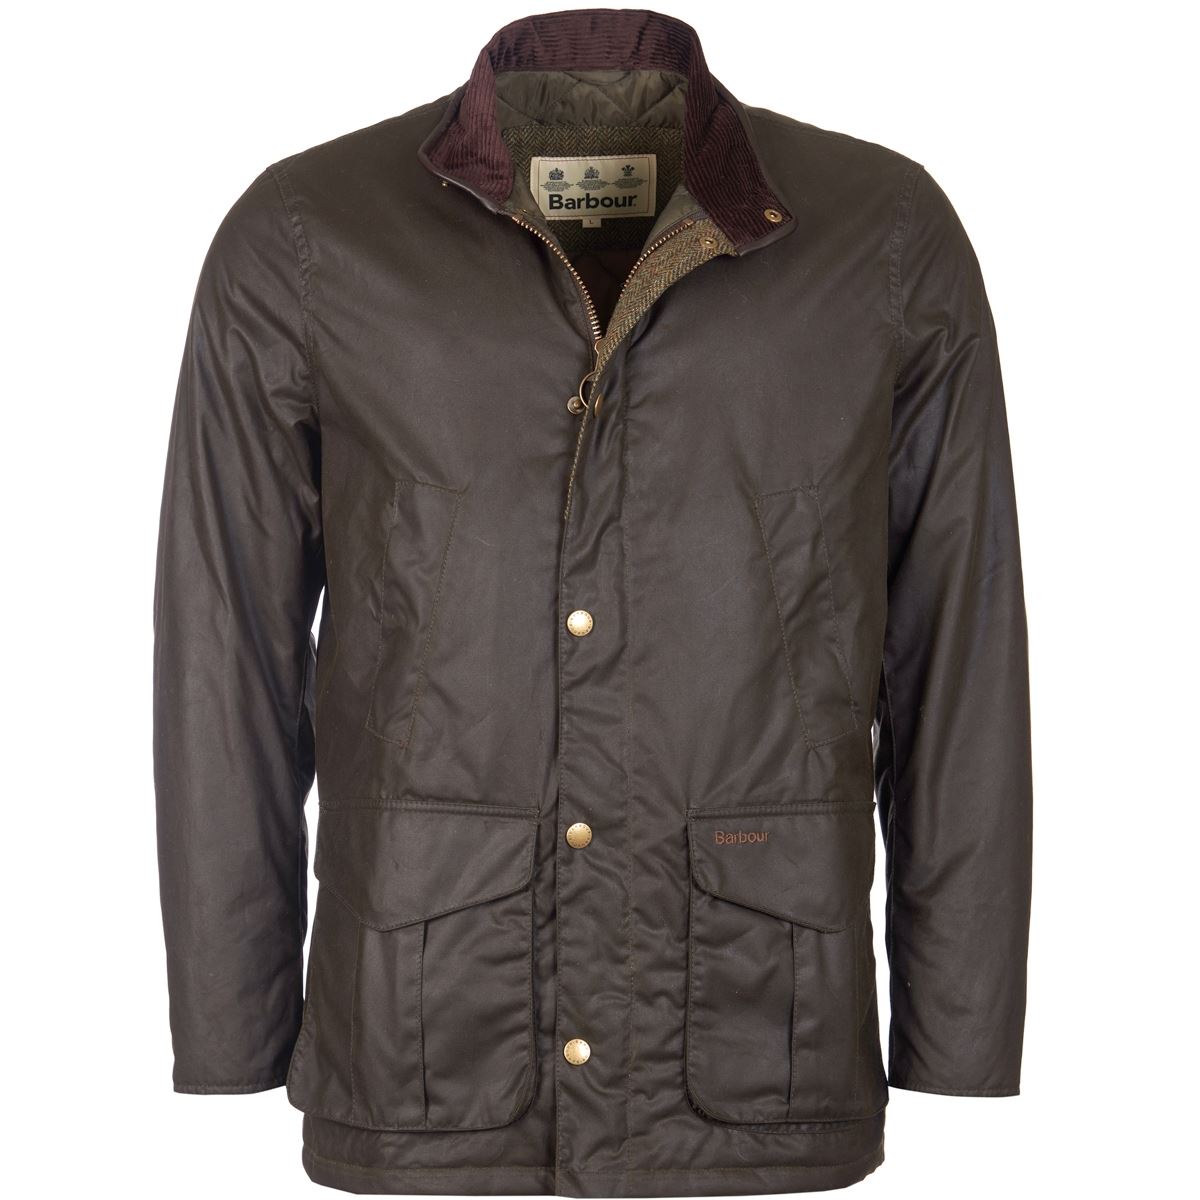 What colors & sizes are offered for the Barbour Hereford Wax Jacket?